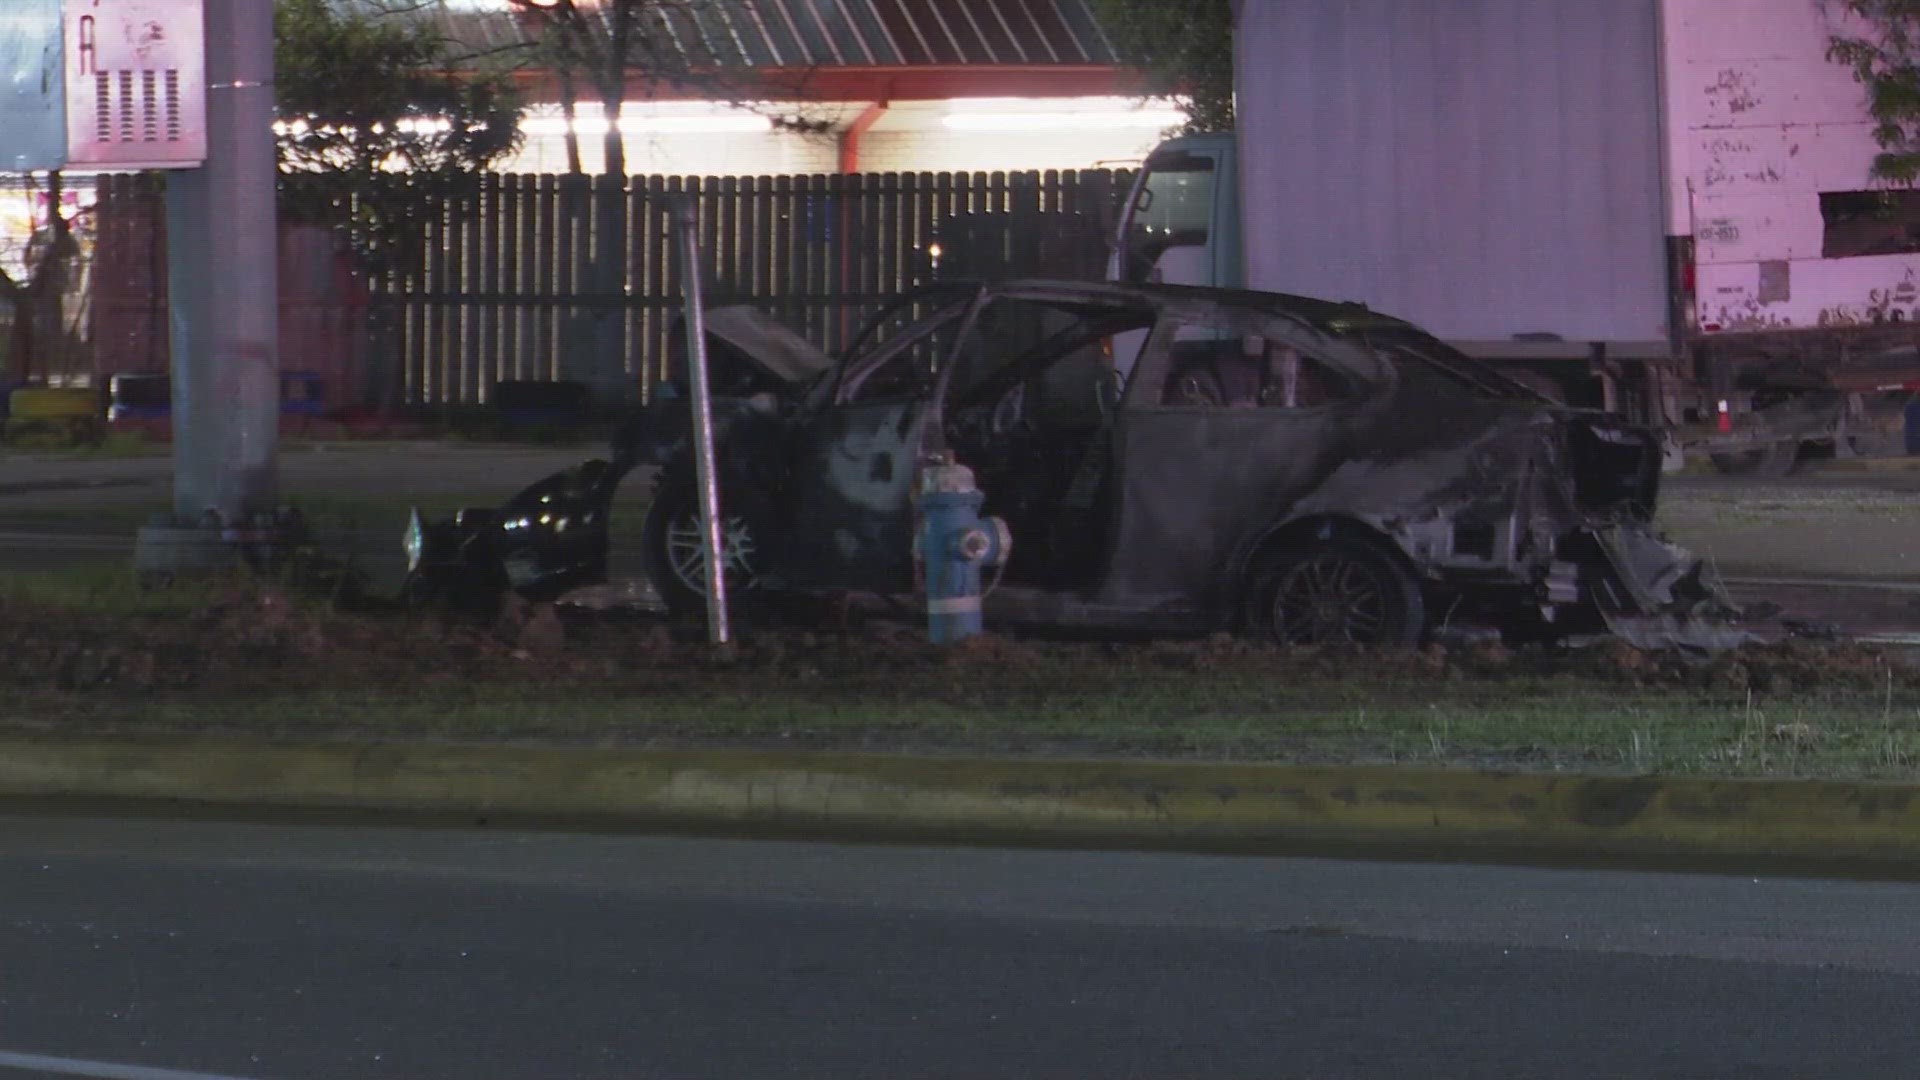 There were a series of fatal crashes Sunday night in the Houston area.